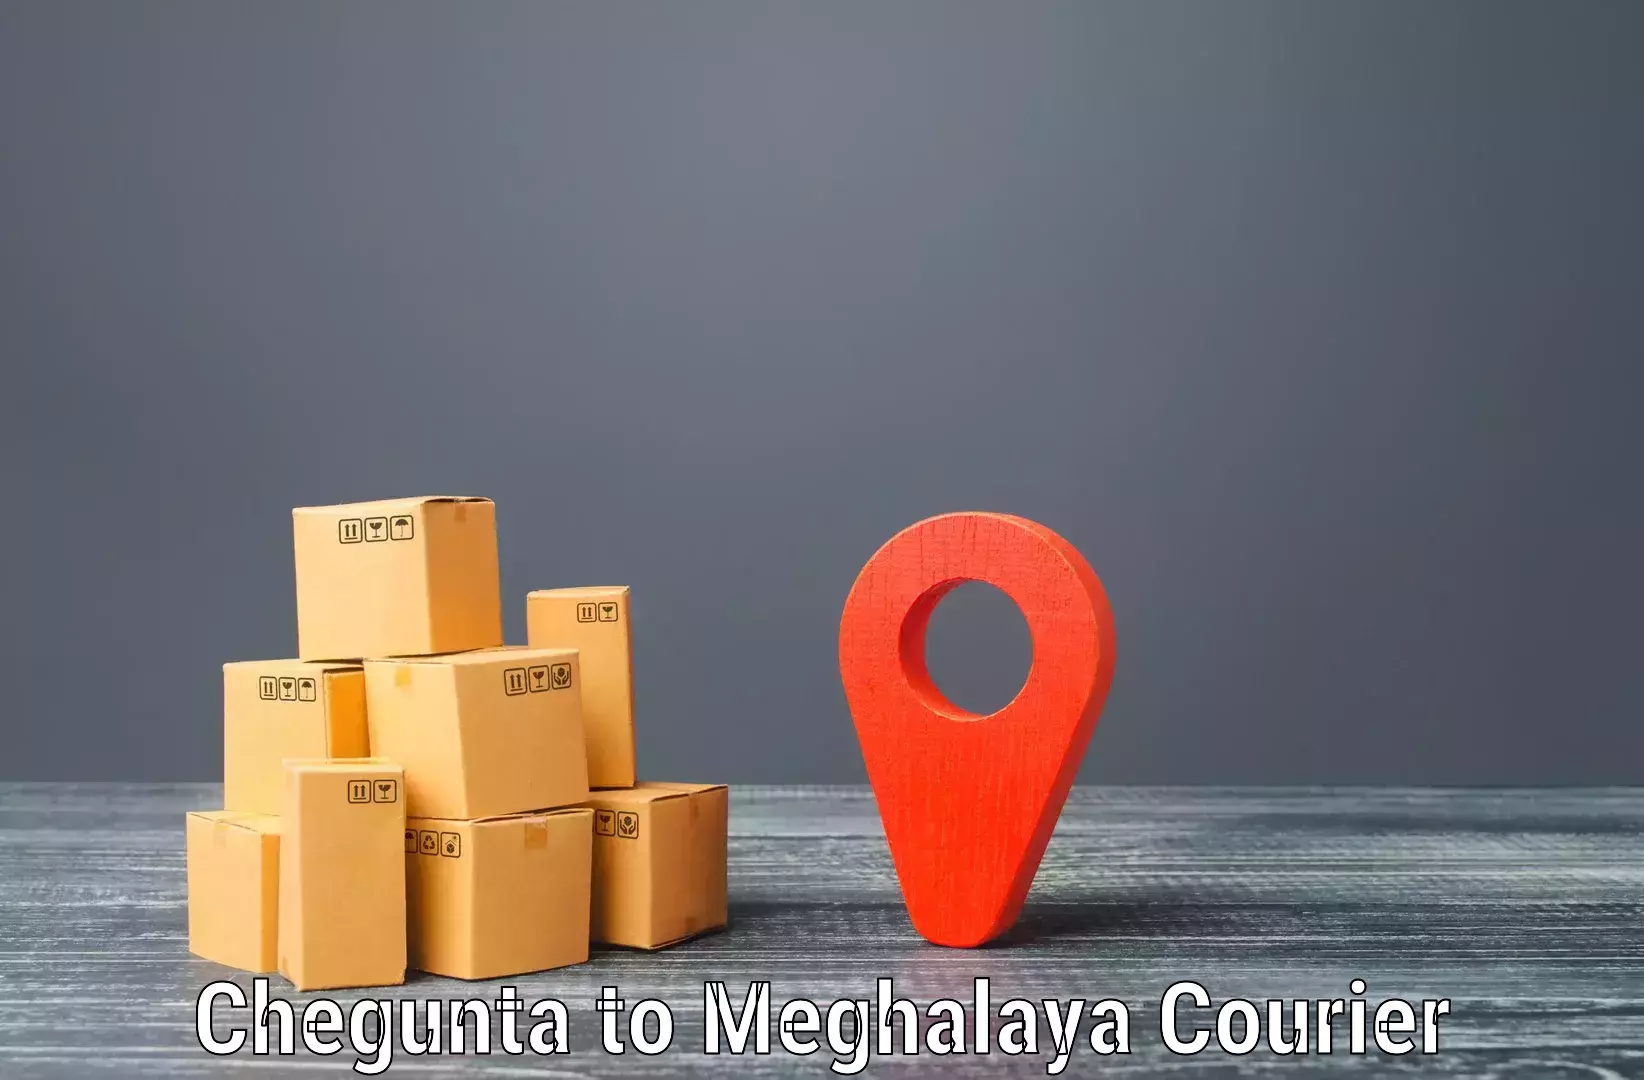 Multi-national courier services Chegunta to Meghalaya